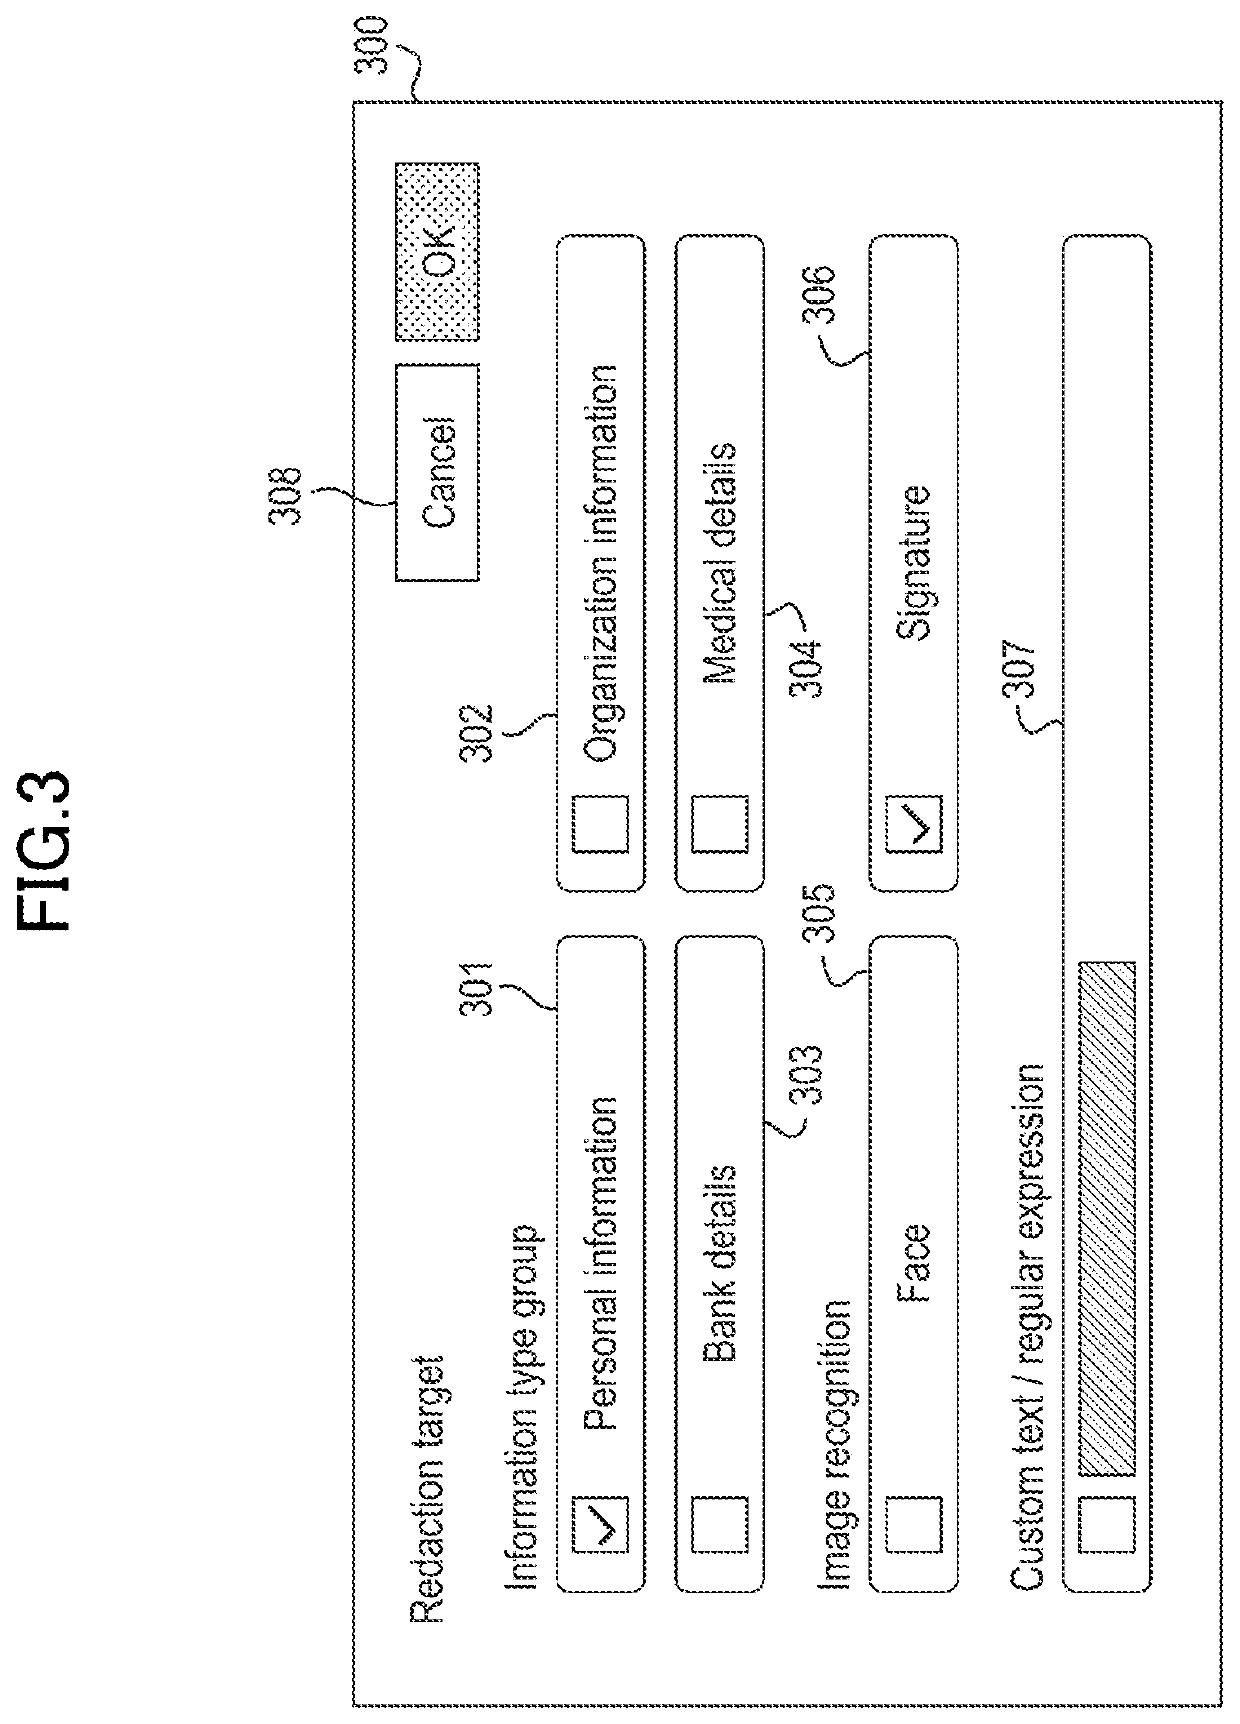 Method and apparatus for document processing